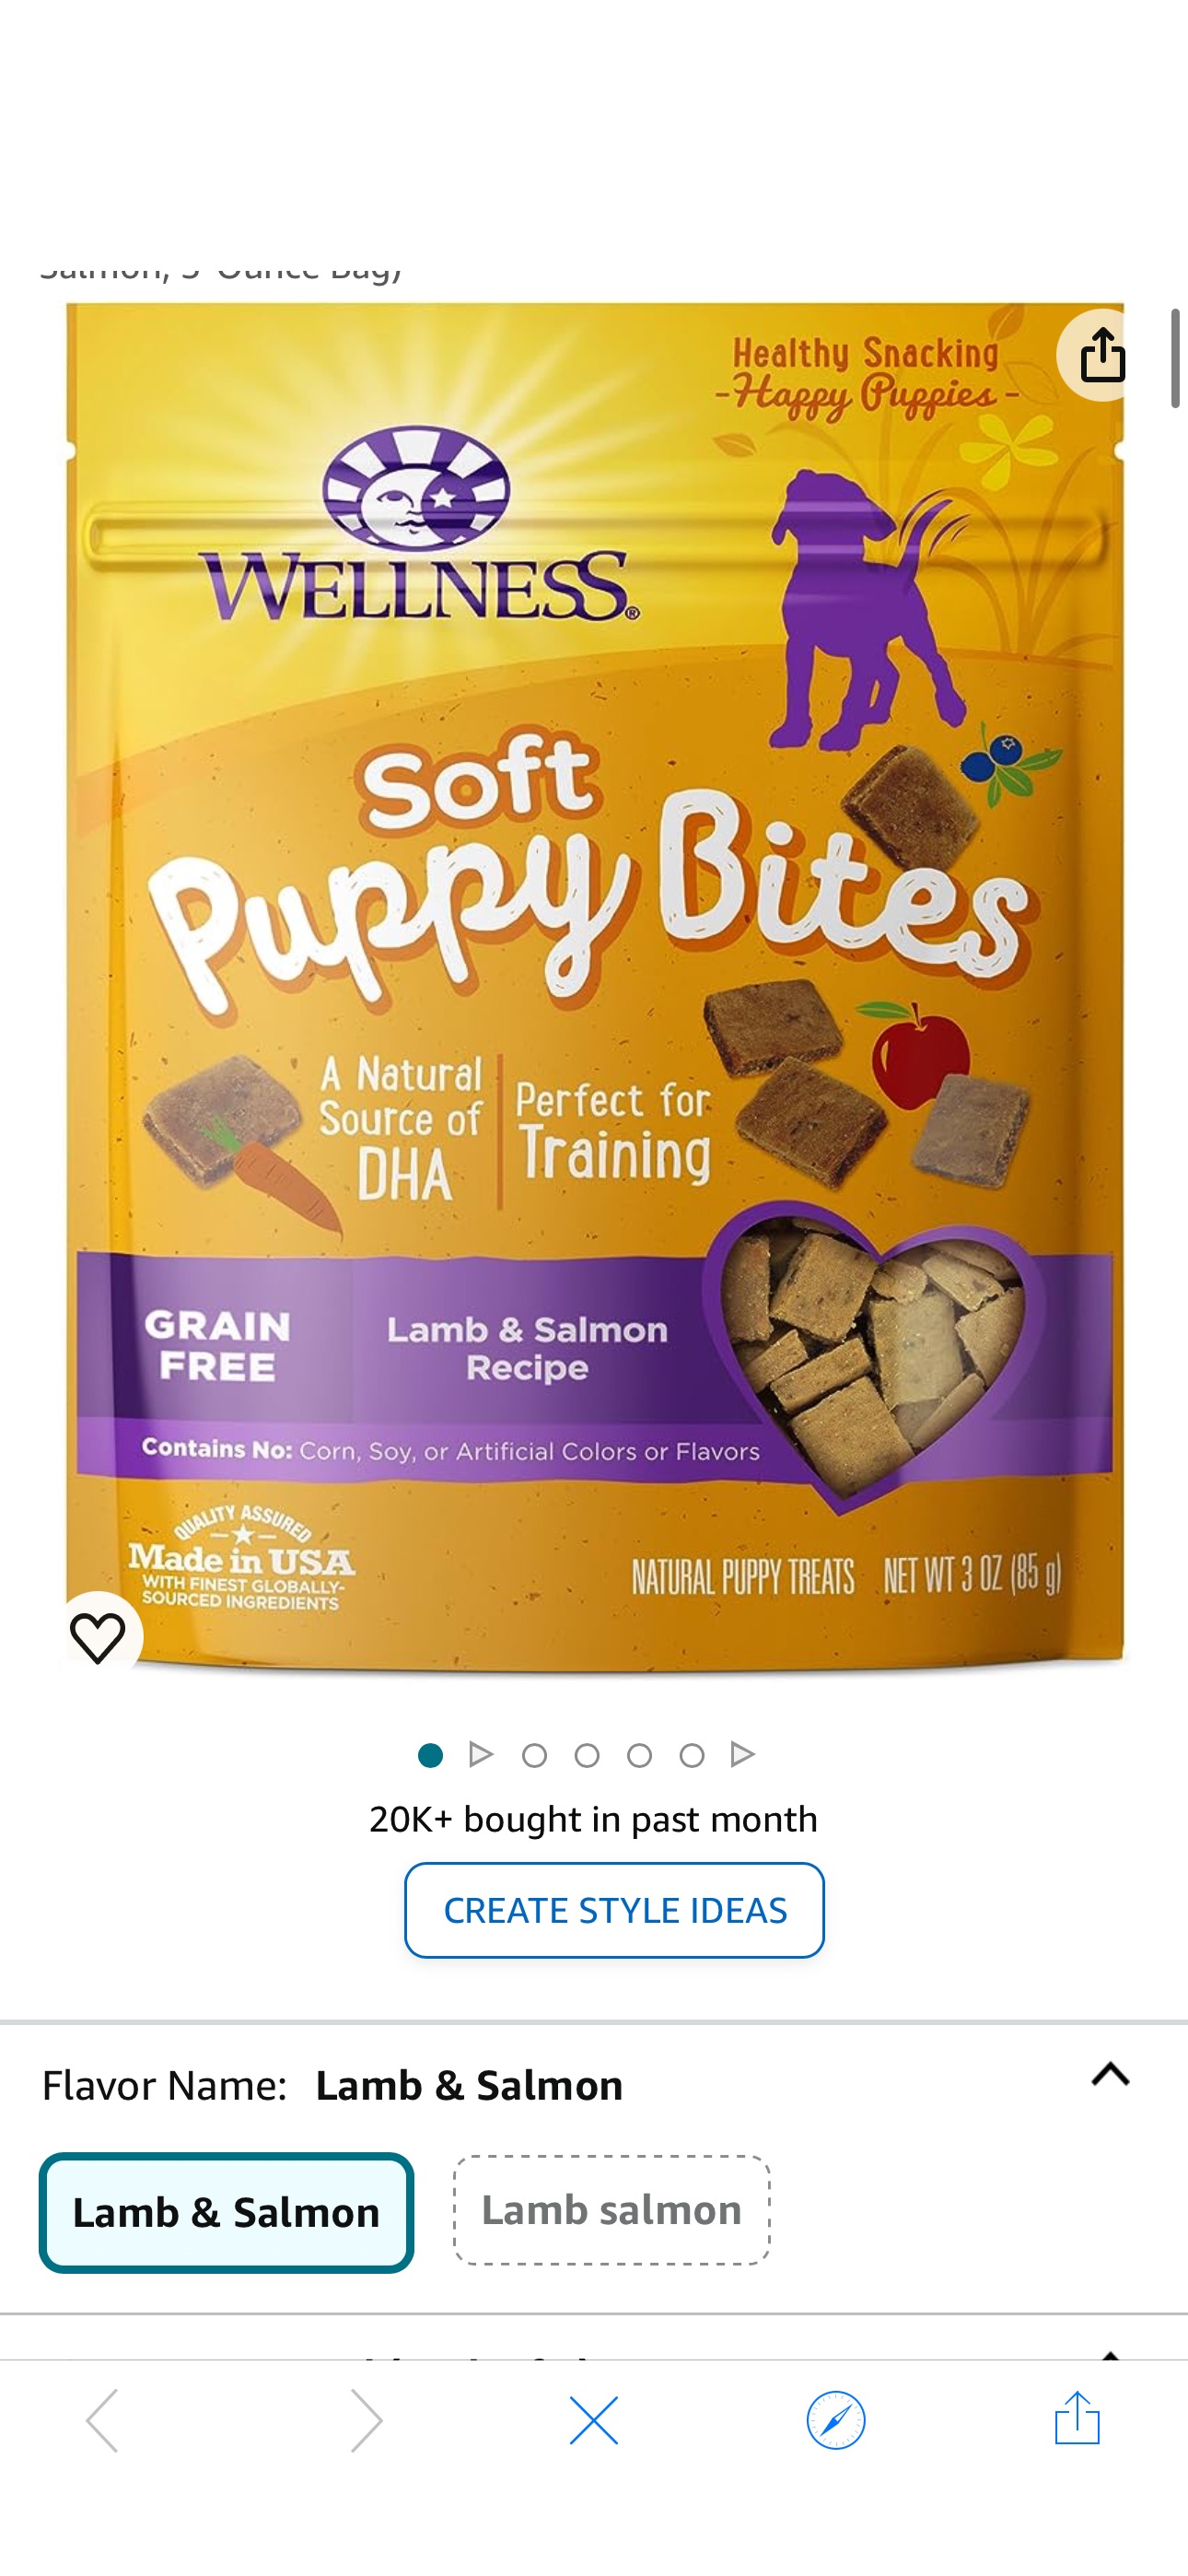 Amazon.com : Wellness Soft Puppy Bites Natural Grain-Free Treats for Training, Dog Treats with Real Meat and DHA, No Artificial Flavors (Lamb & Salmon, 3-Ounce Bag) : Pet Snack Treats : Pet Supplies